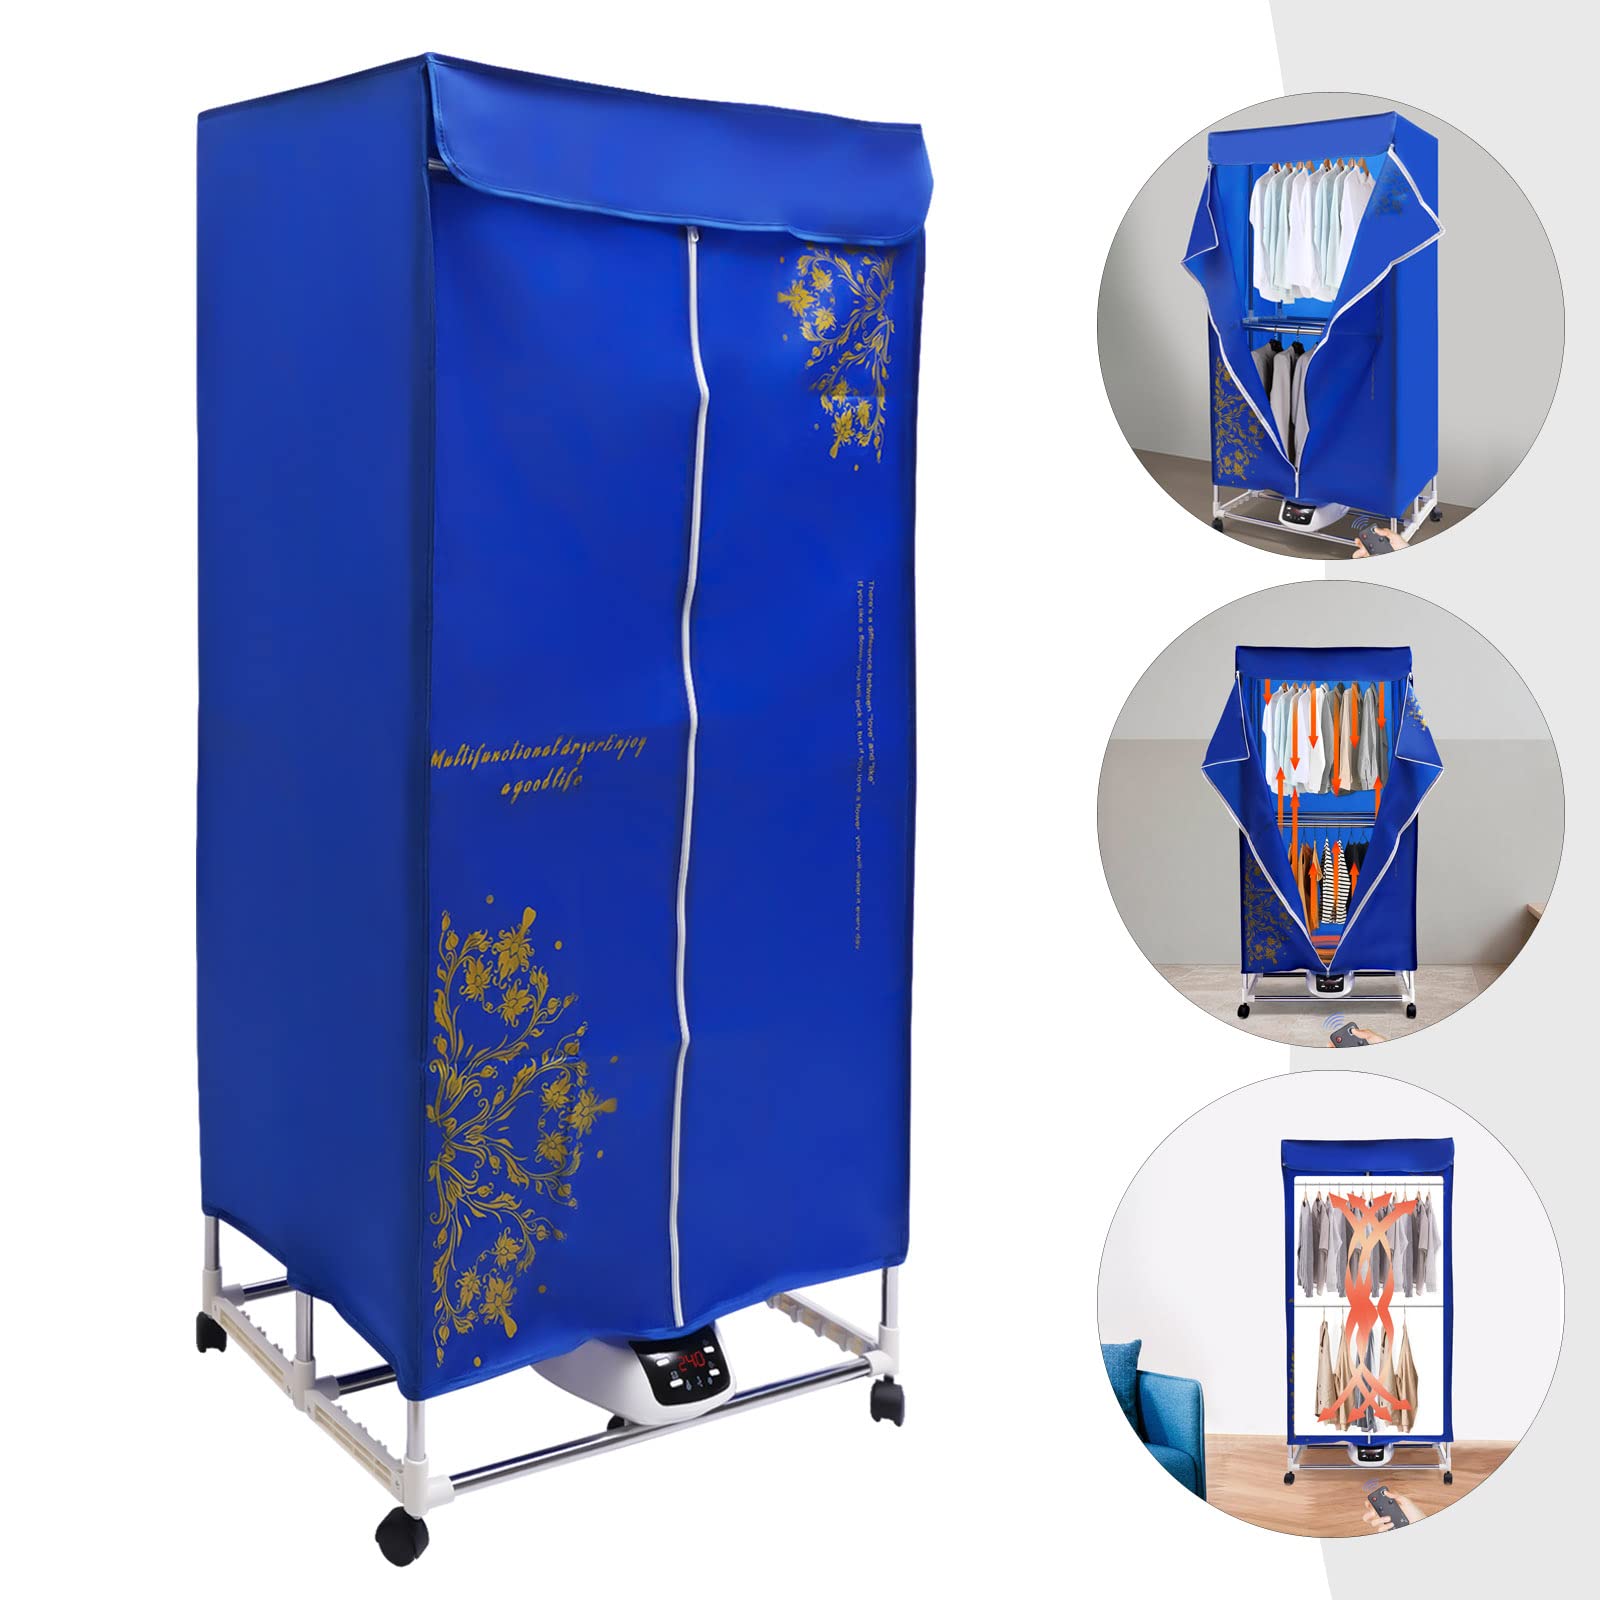 Portable Dryer, 1200-1500W Clothes Dryer, 66.14LBs Capacity Foldable 2-Tier Electric Portable Dryer Rack, Energy Saving Mini Dryer with Digital Automatic Timer for Apartment House RV